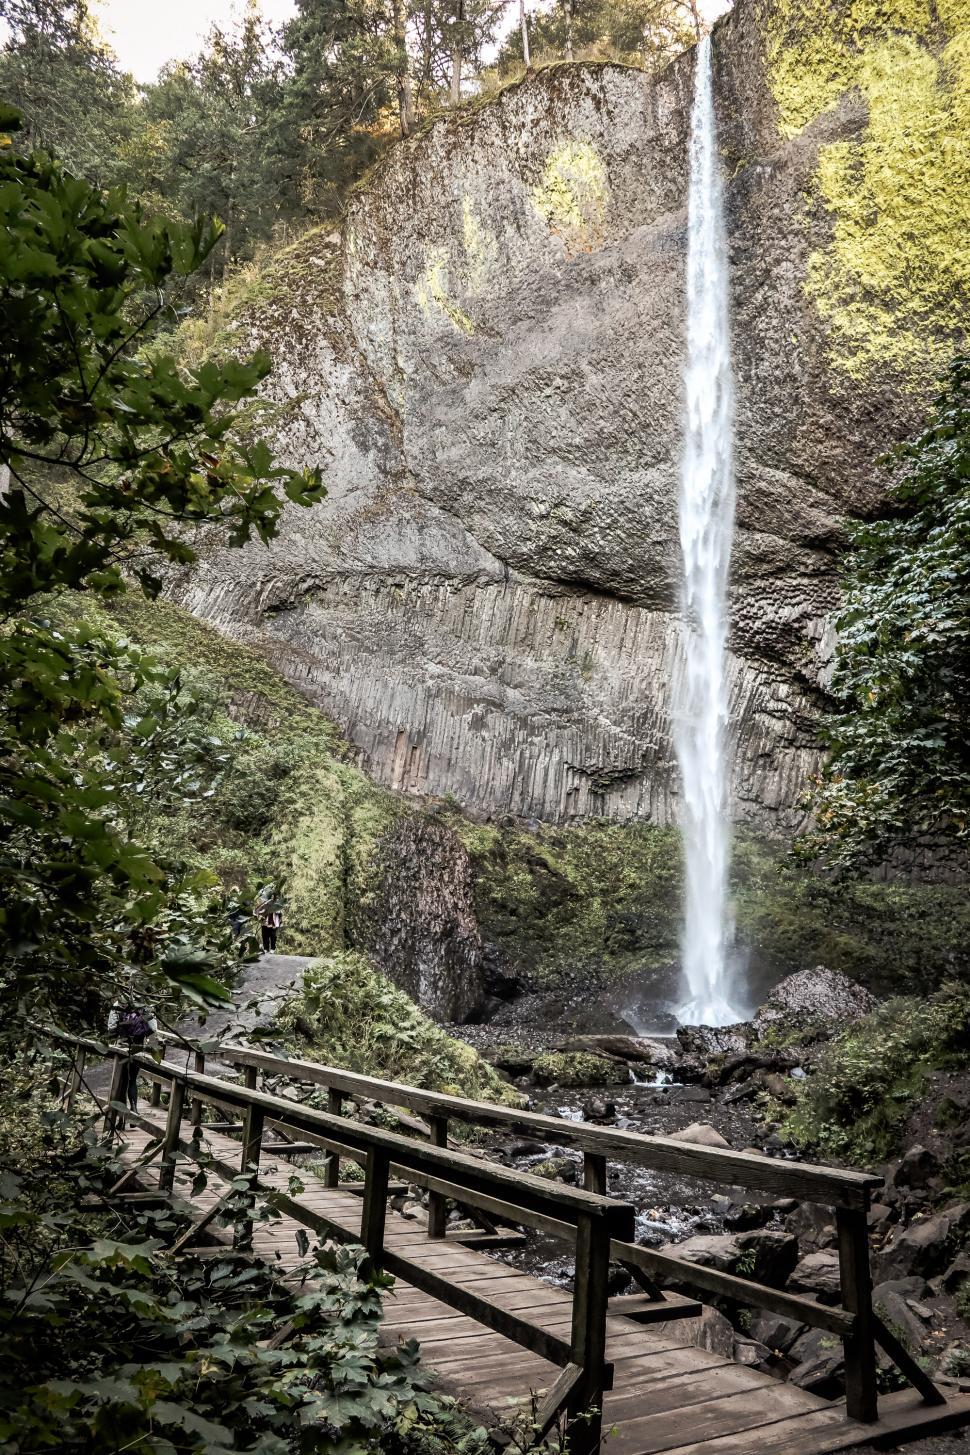 Free Image of Latourell Falls and Nearby Wooden Footbridge 